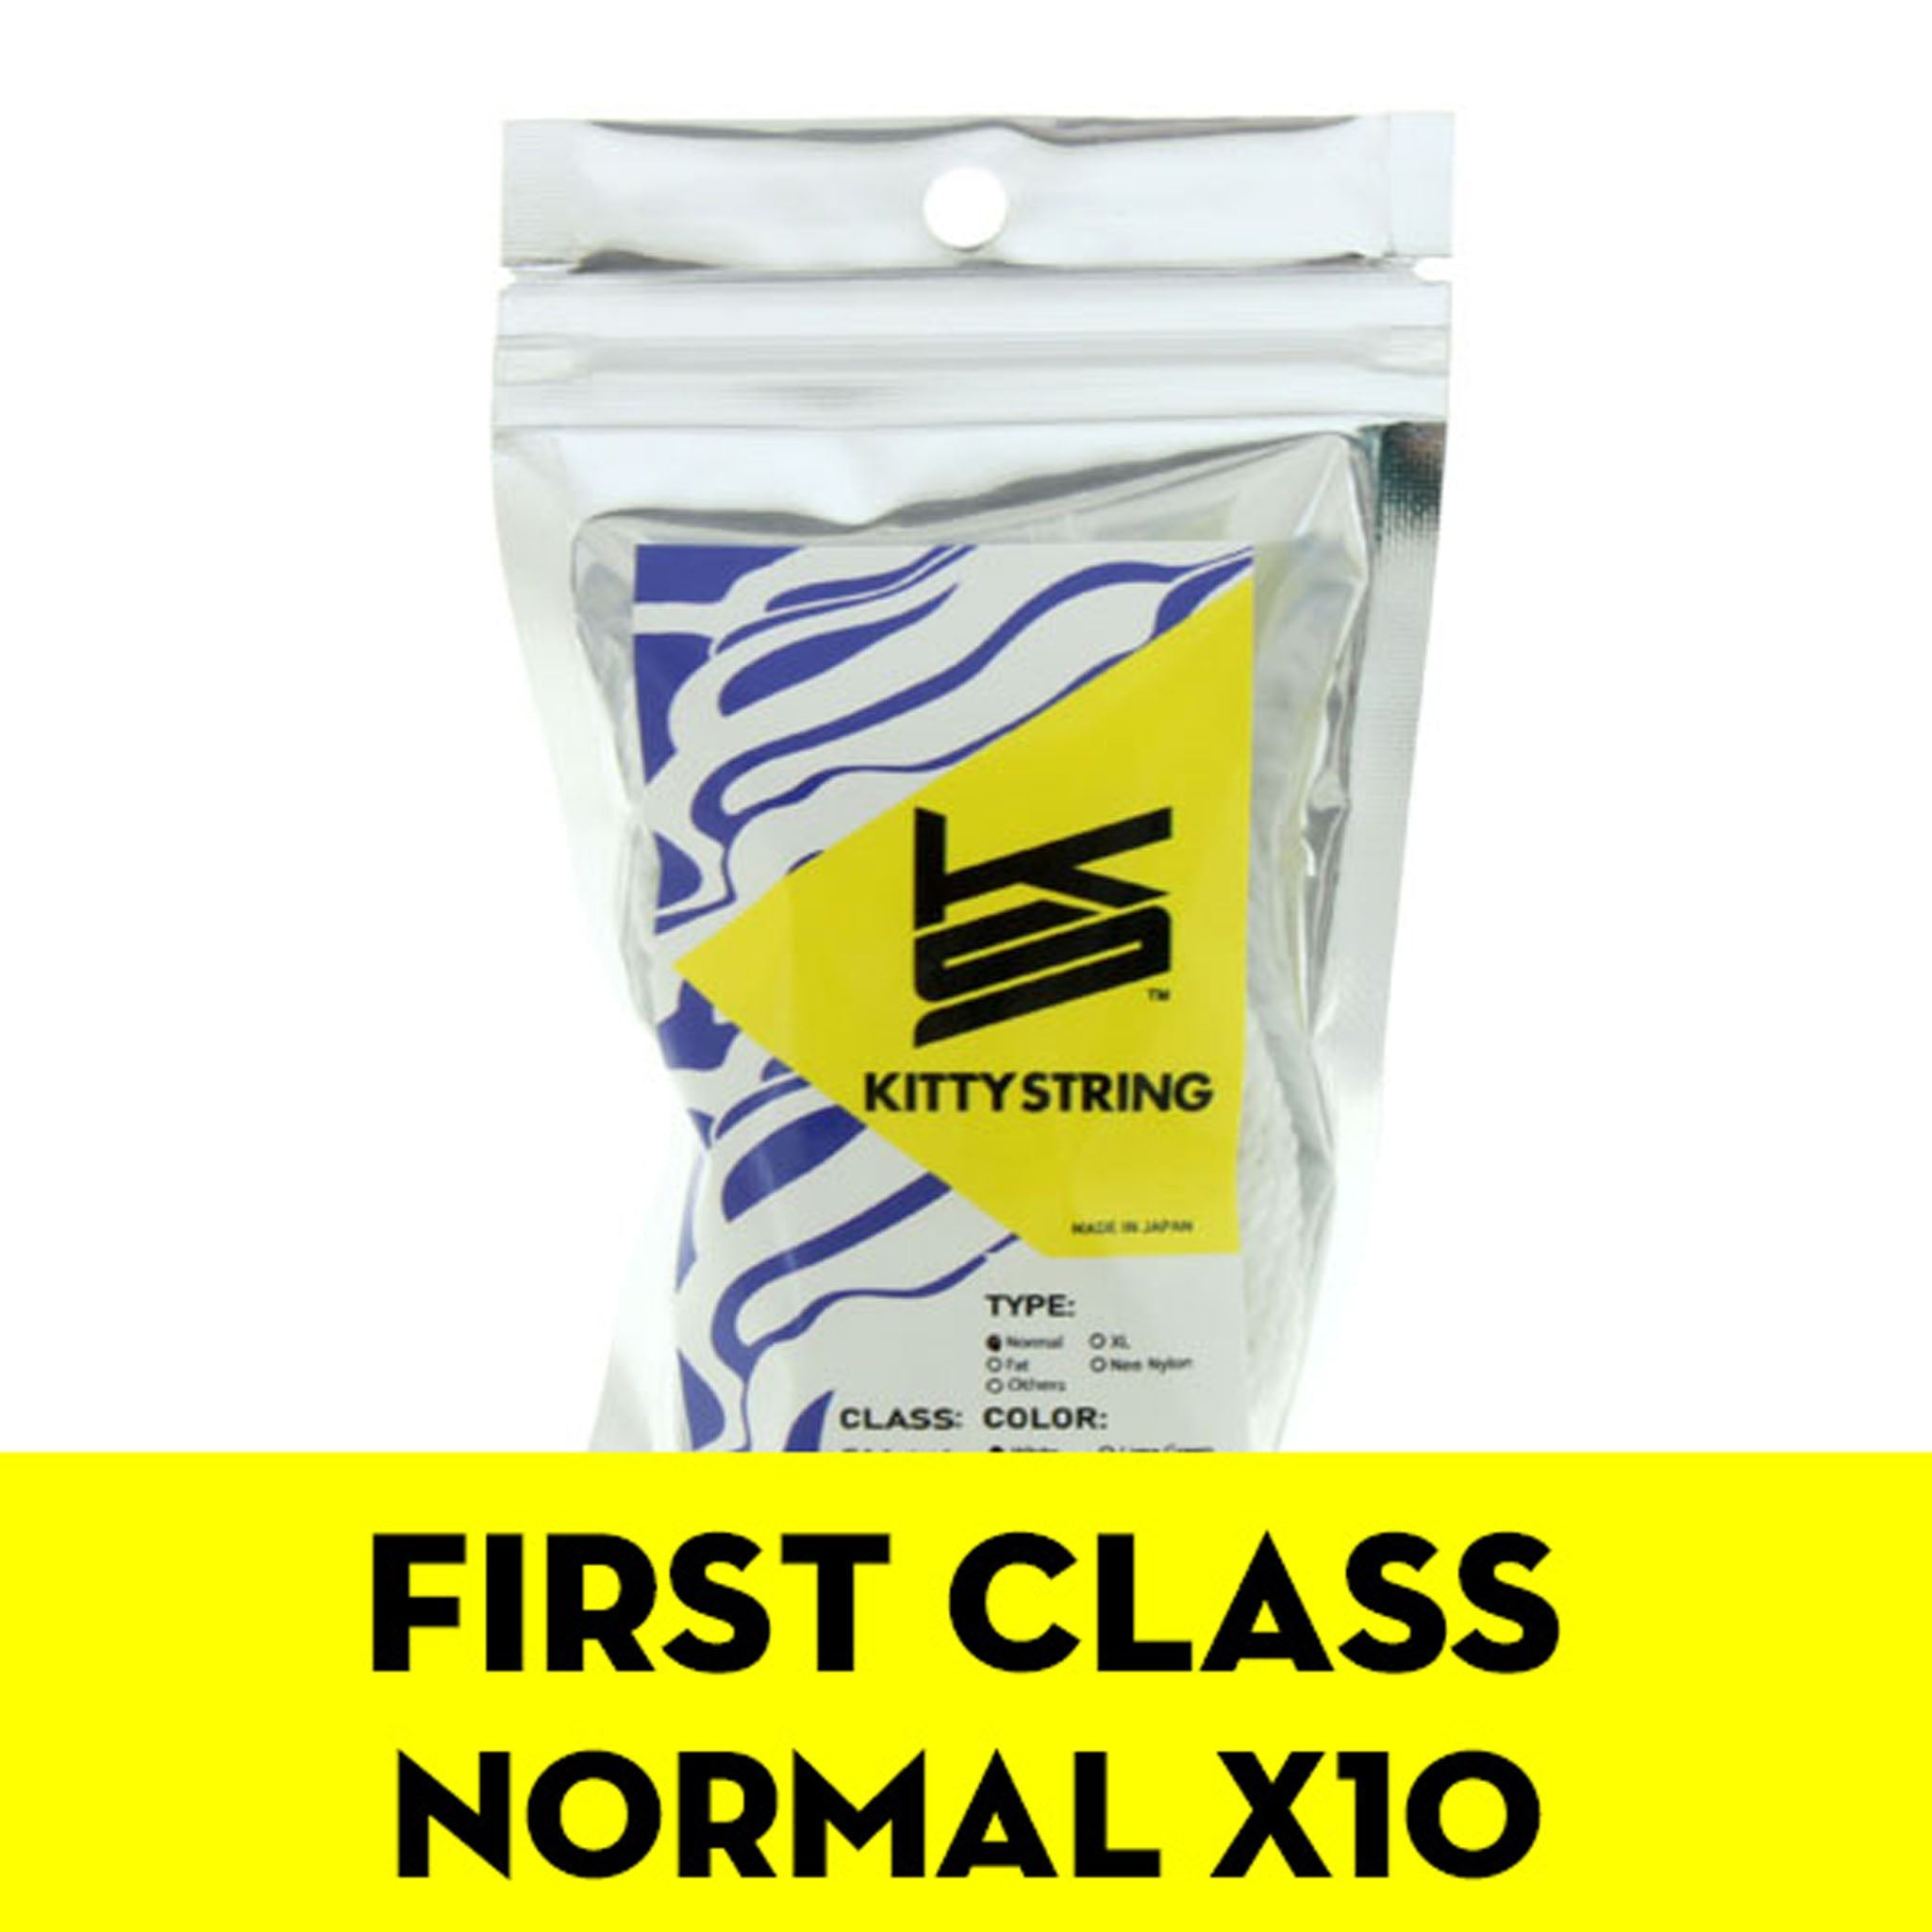 Kitty String (Poly100%) "First-Class" Normal x10